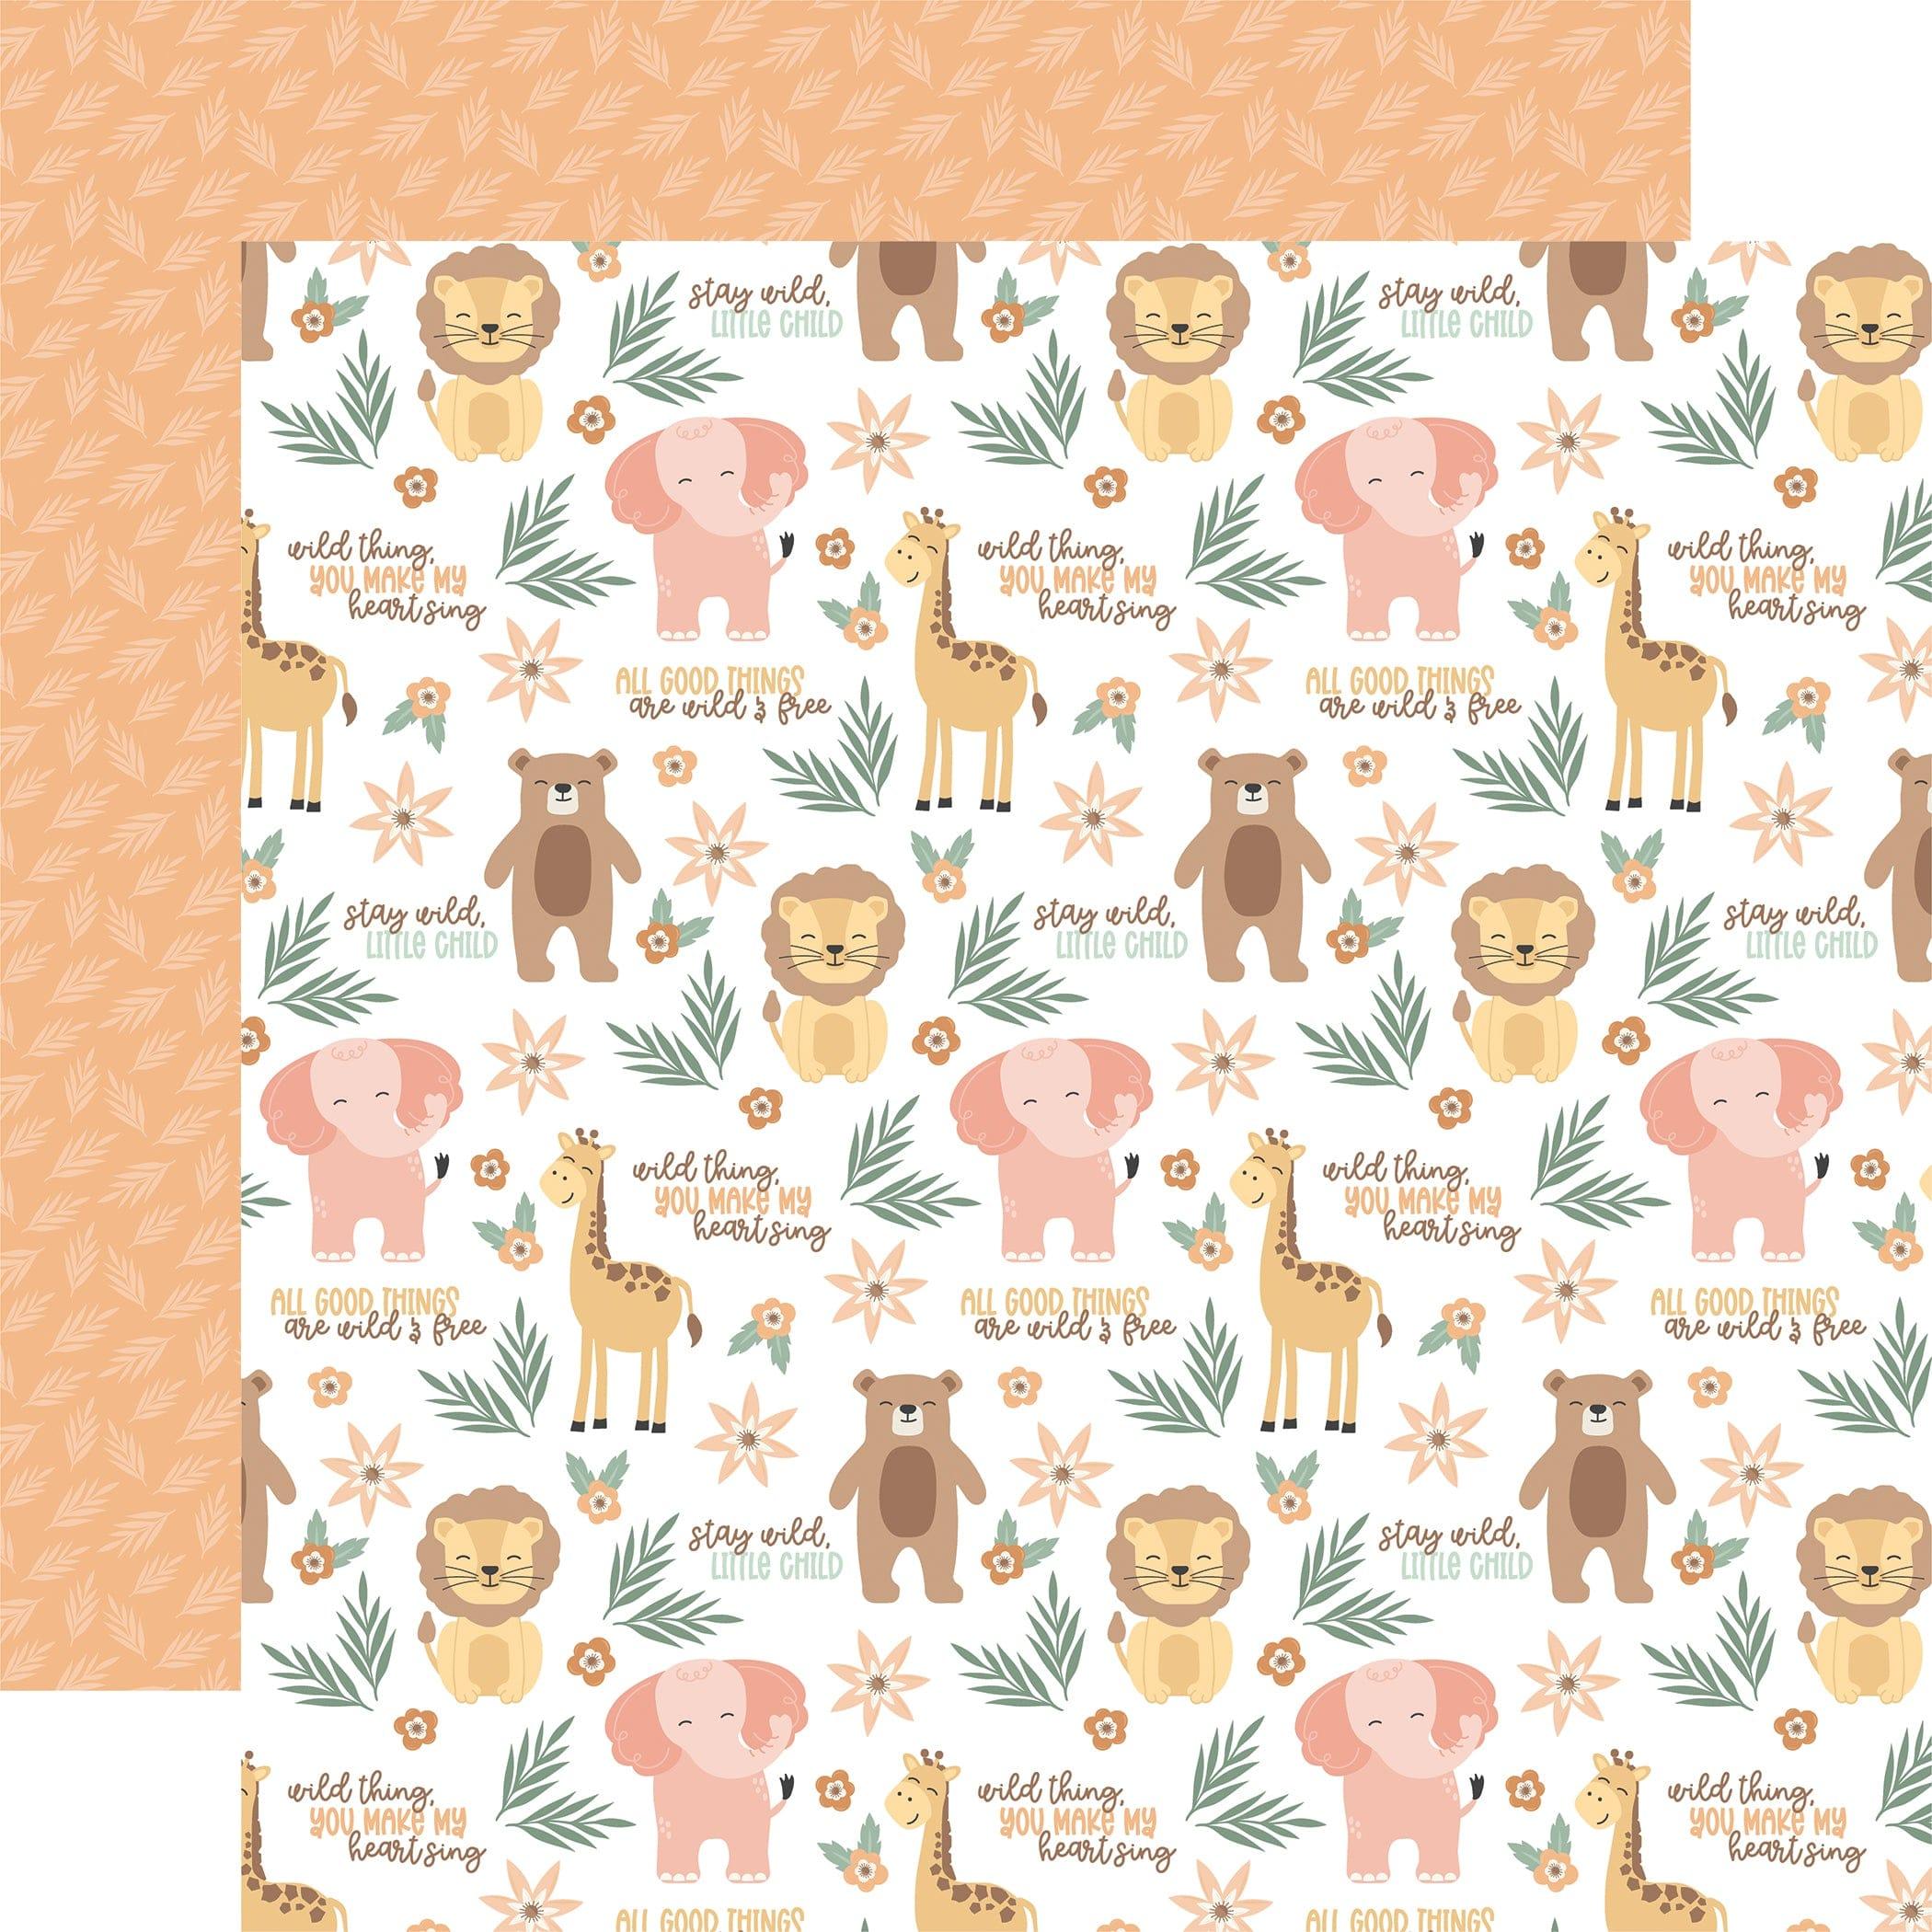 Our Baby Girl Collection Cuddly Creatures 12 x 12 Double-Sided Scrapbook Paper by Echo Park Paper - Scrapbook Supply Companies